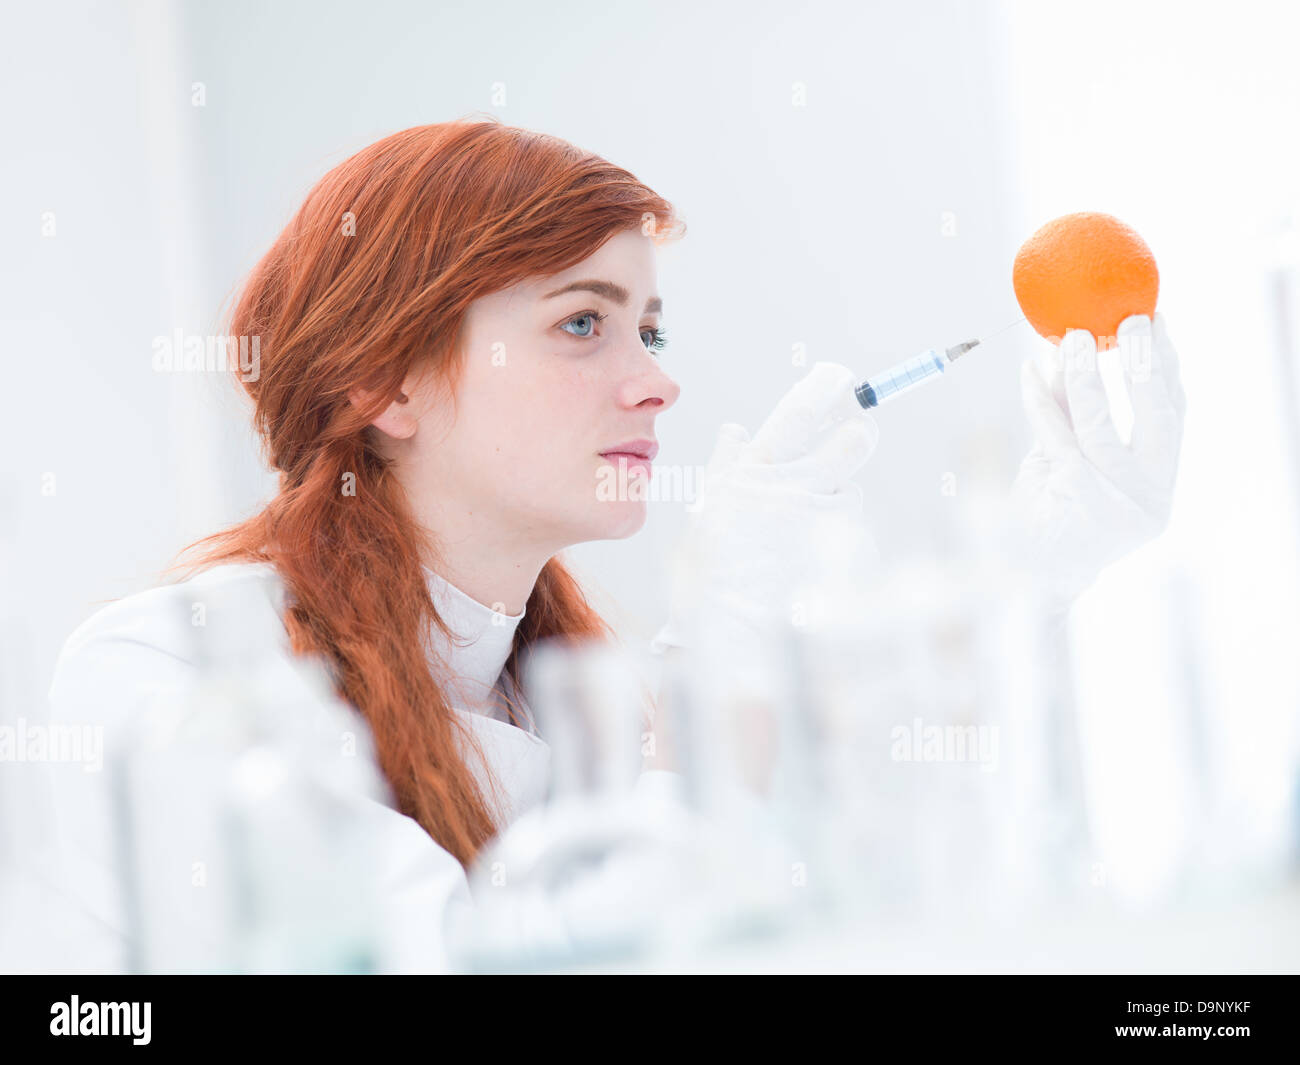 close-up of woman in a laboratory injecting an orange Stock Photo